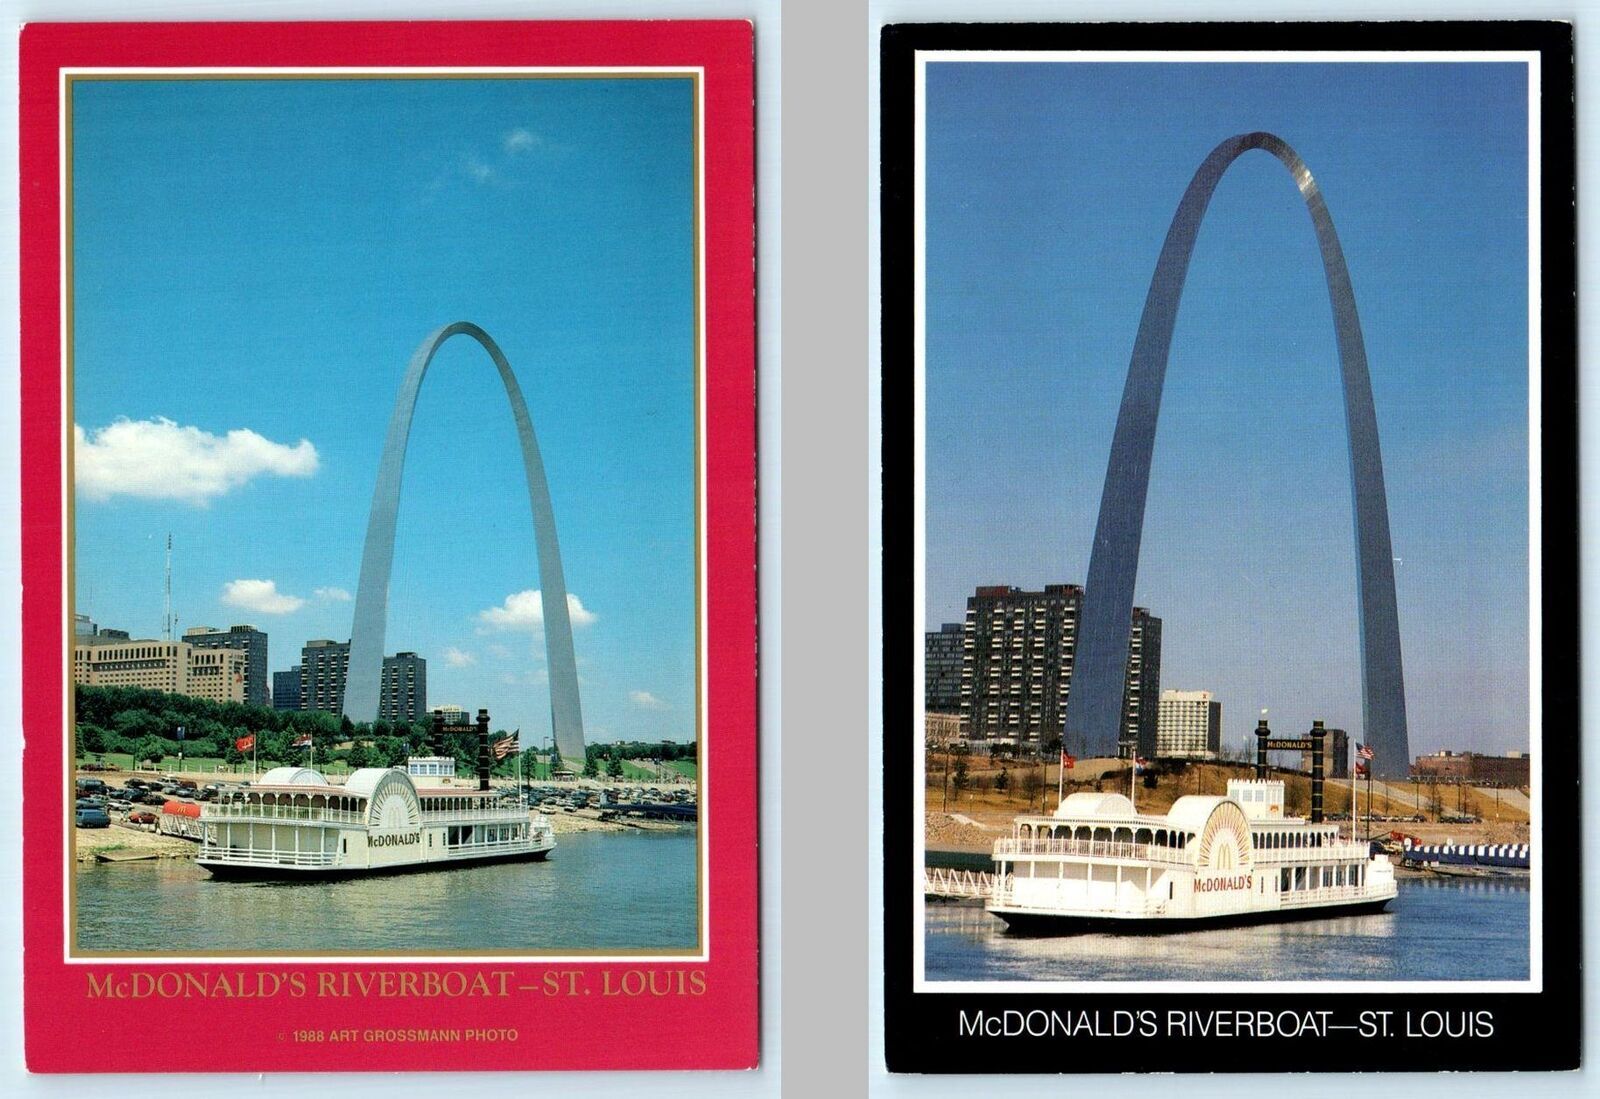 Riverboats at The Gateway Arch - Explore St. Louis